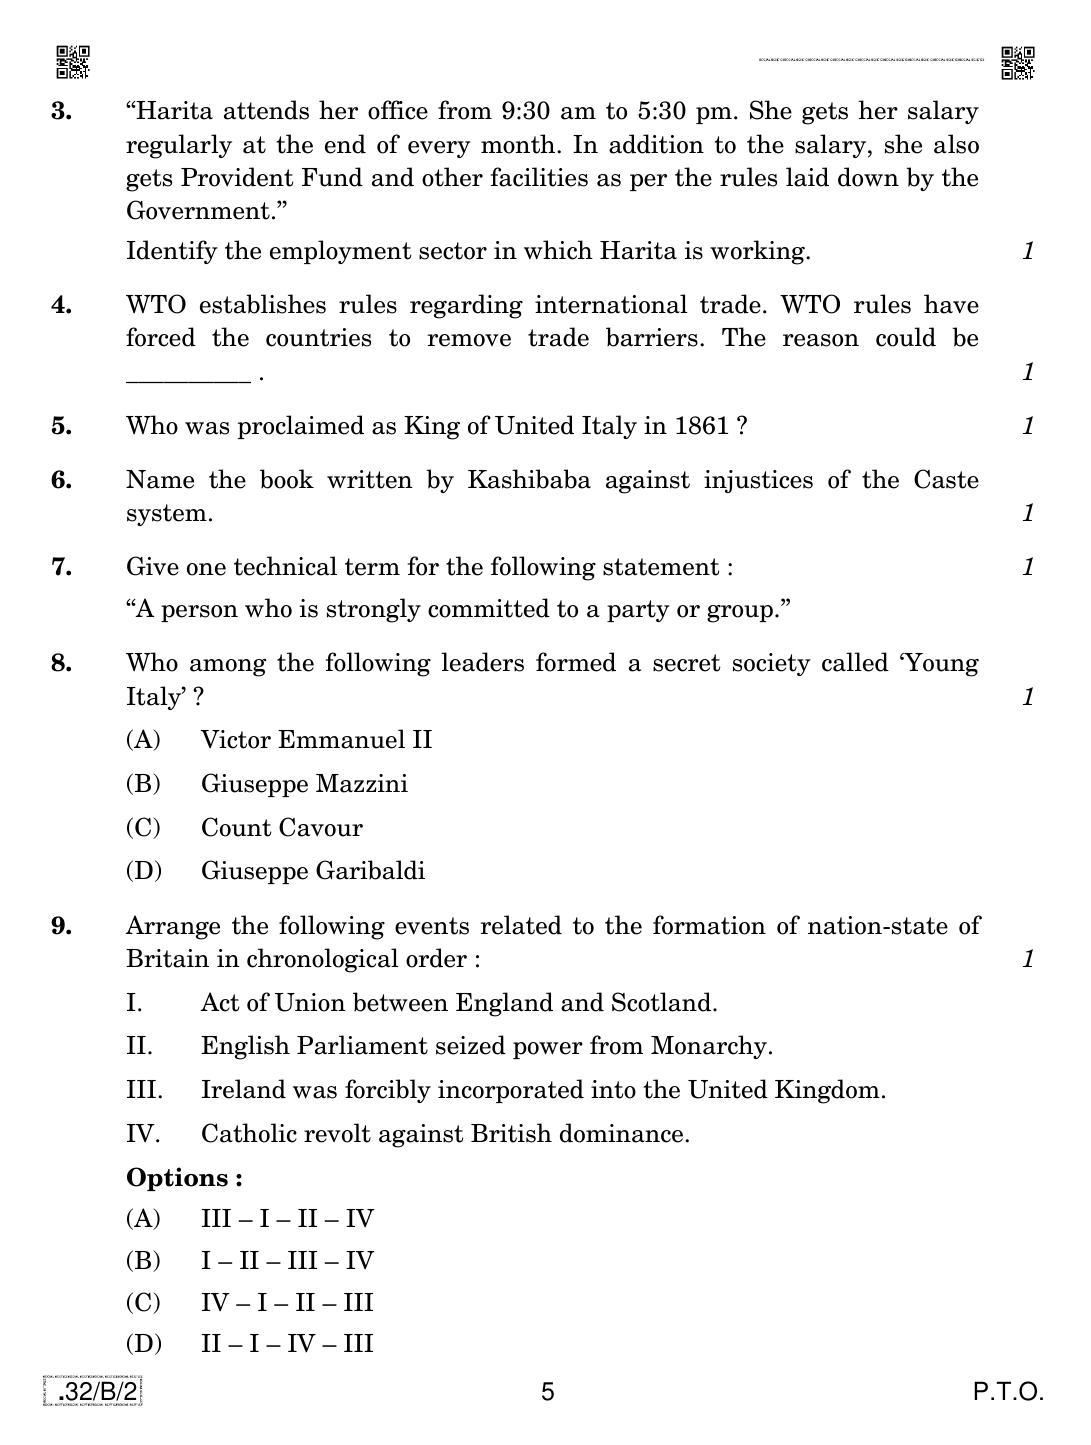 CBSE Class 10 32-C-2 Social Science 2020 Compartment Question Paper - Page 5